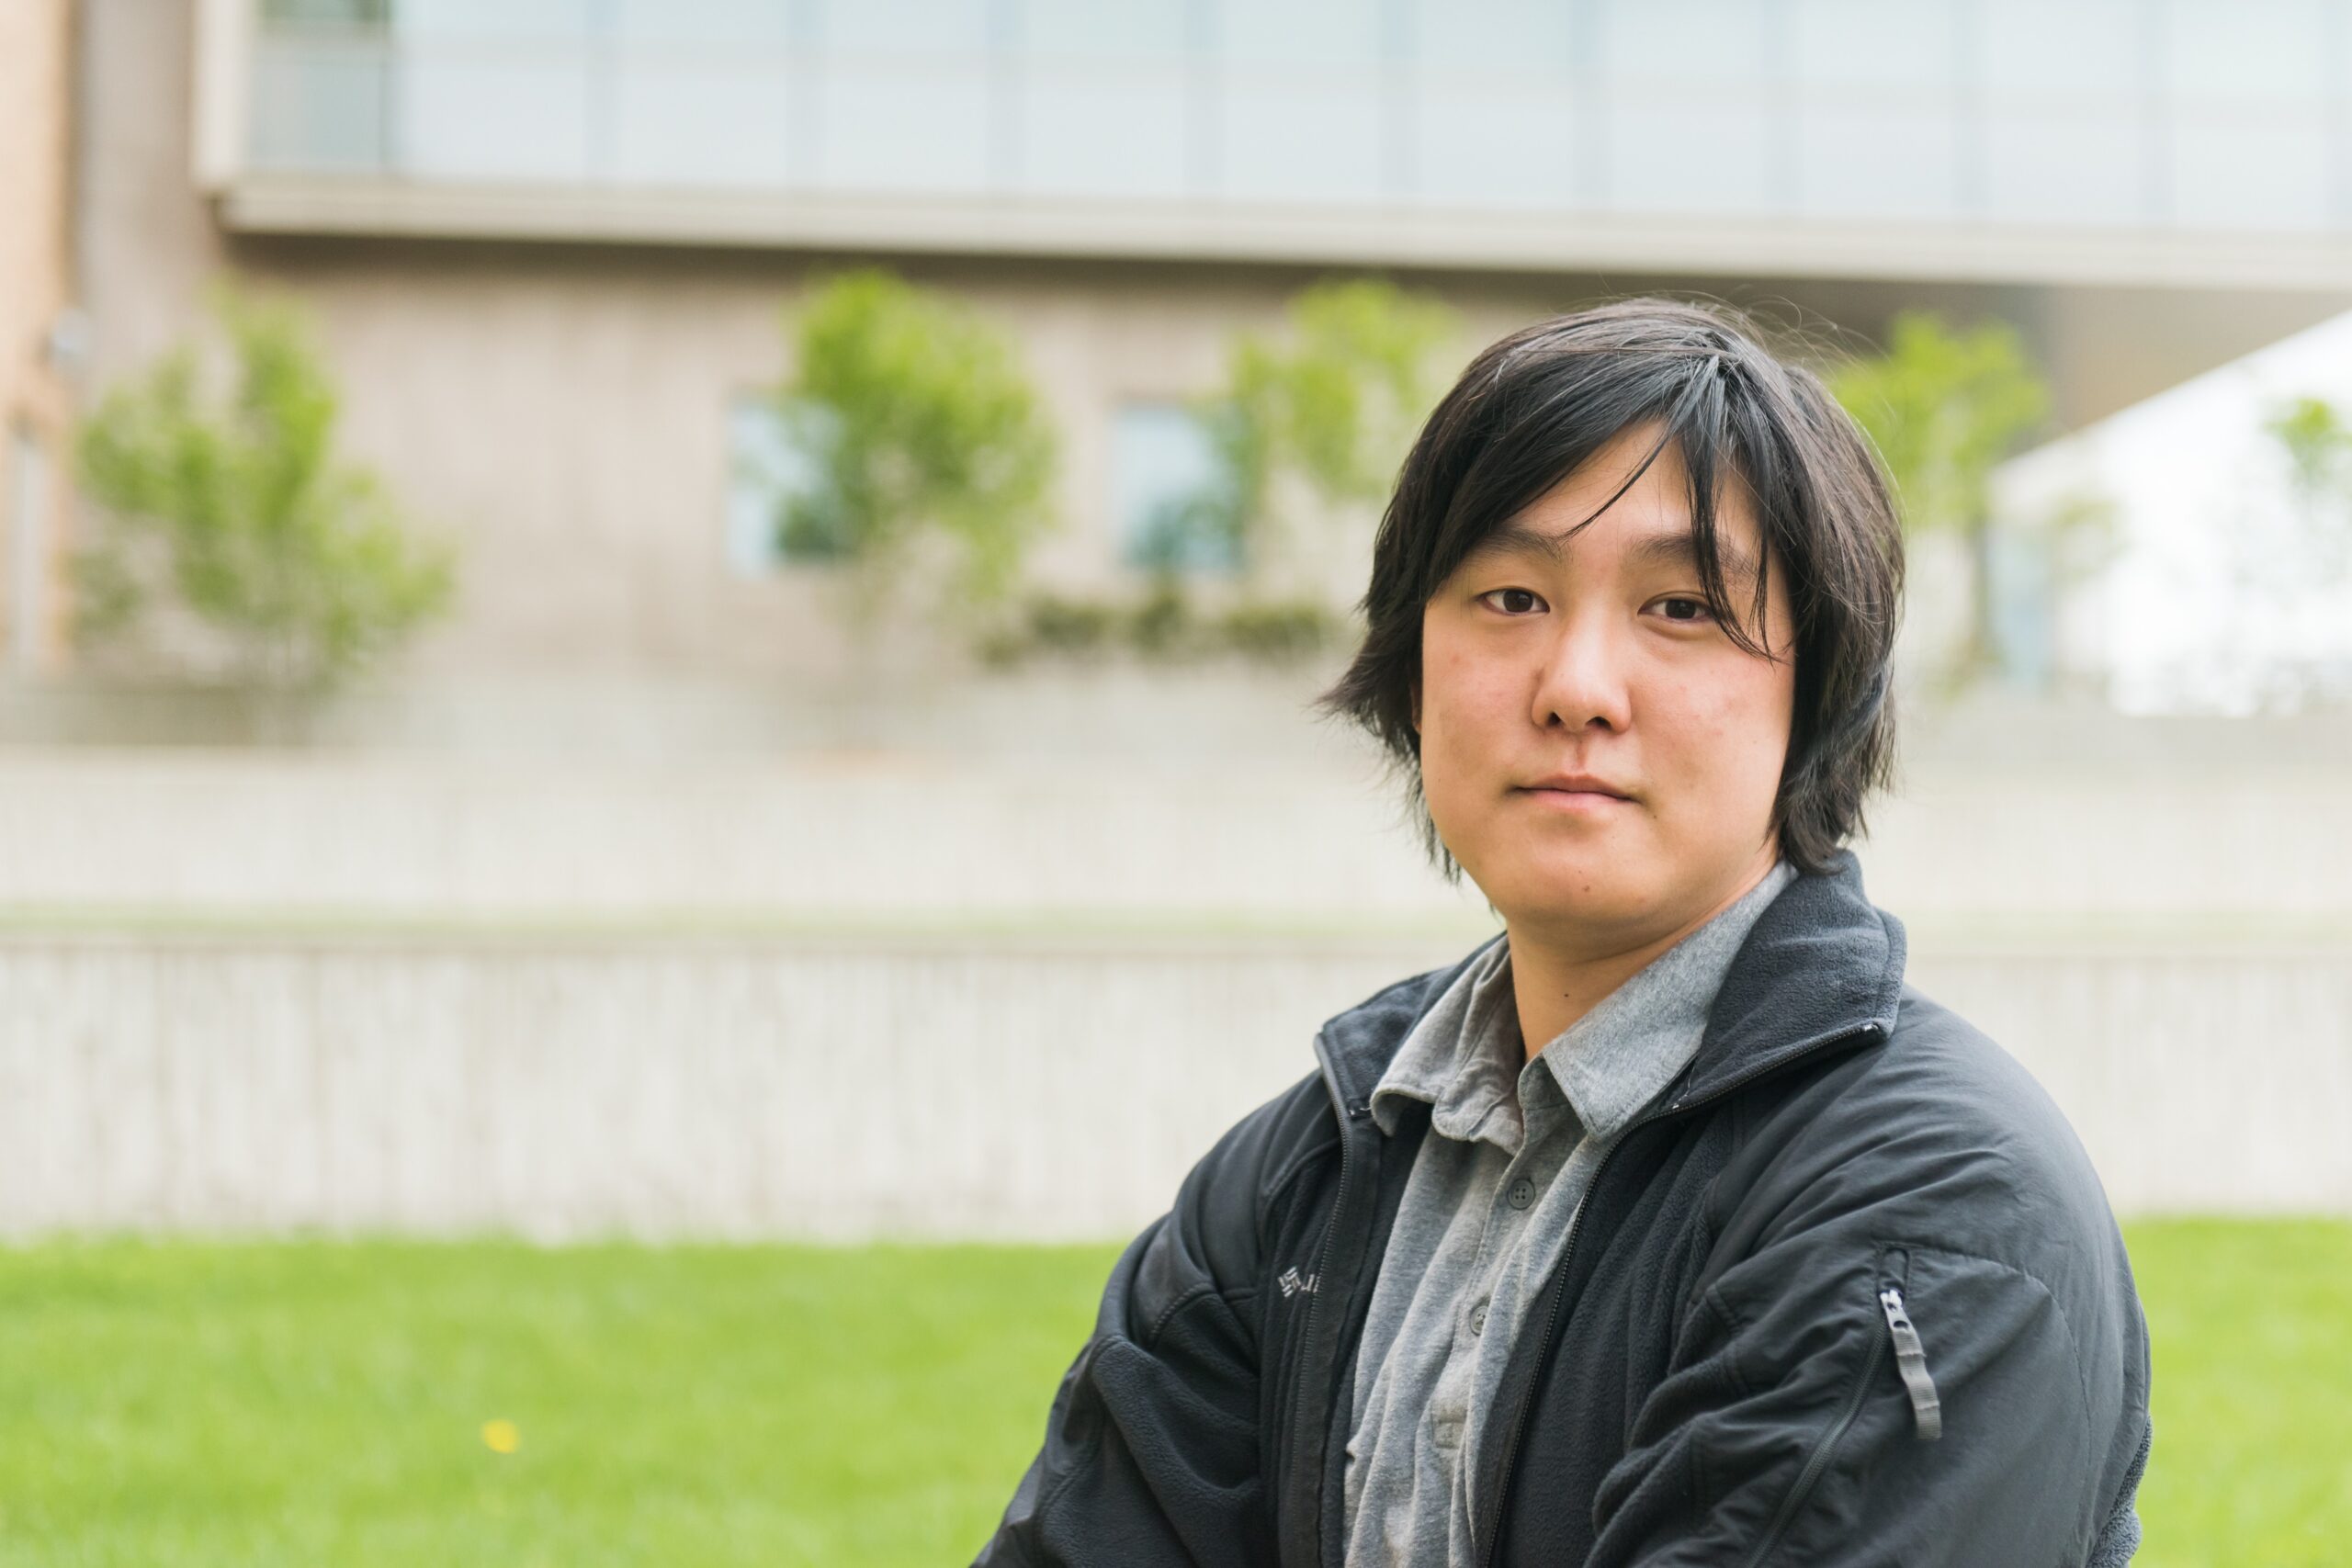 Andrew Lee, engineer who enjoys teaching robotics, pursues Ph.D. at University of Guelph